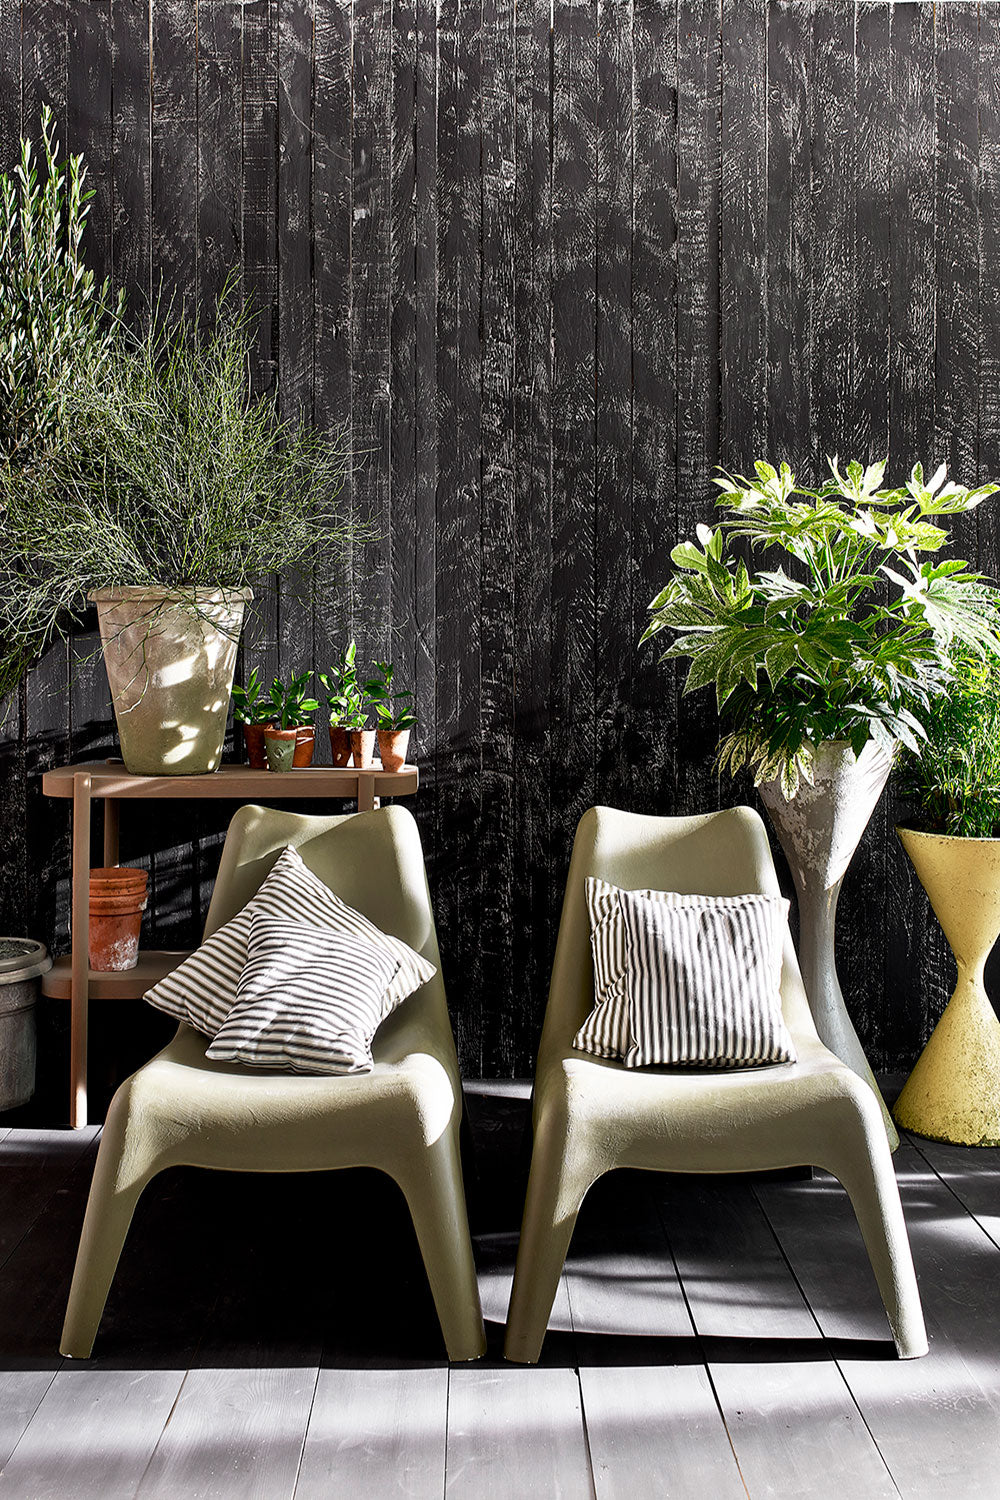 Ikea Garden Chairs In Olive & Athenian Black Chalk Paint® Fence